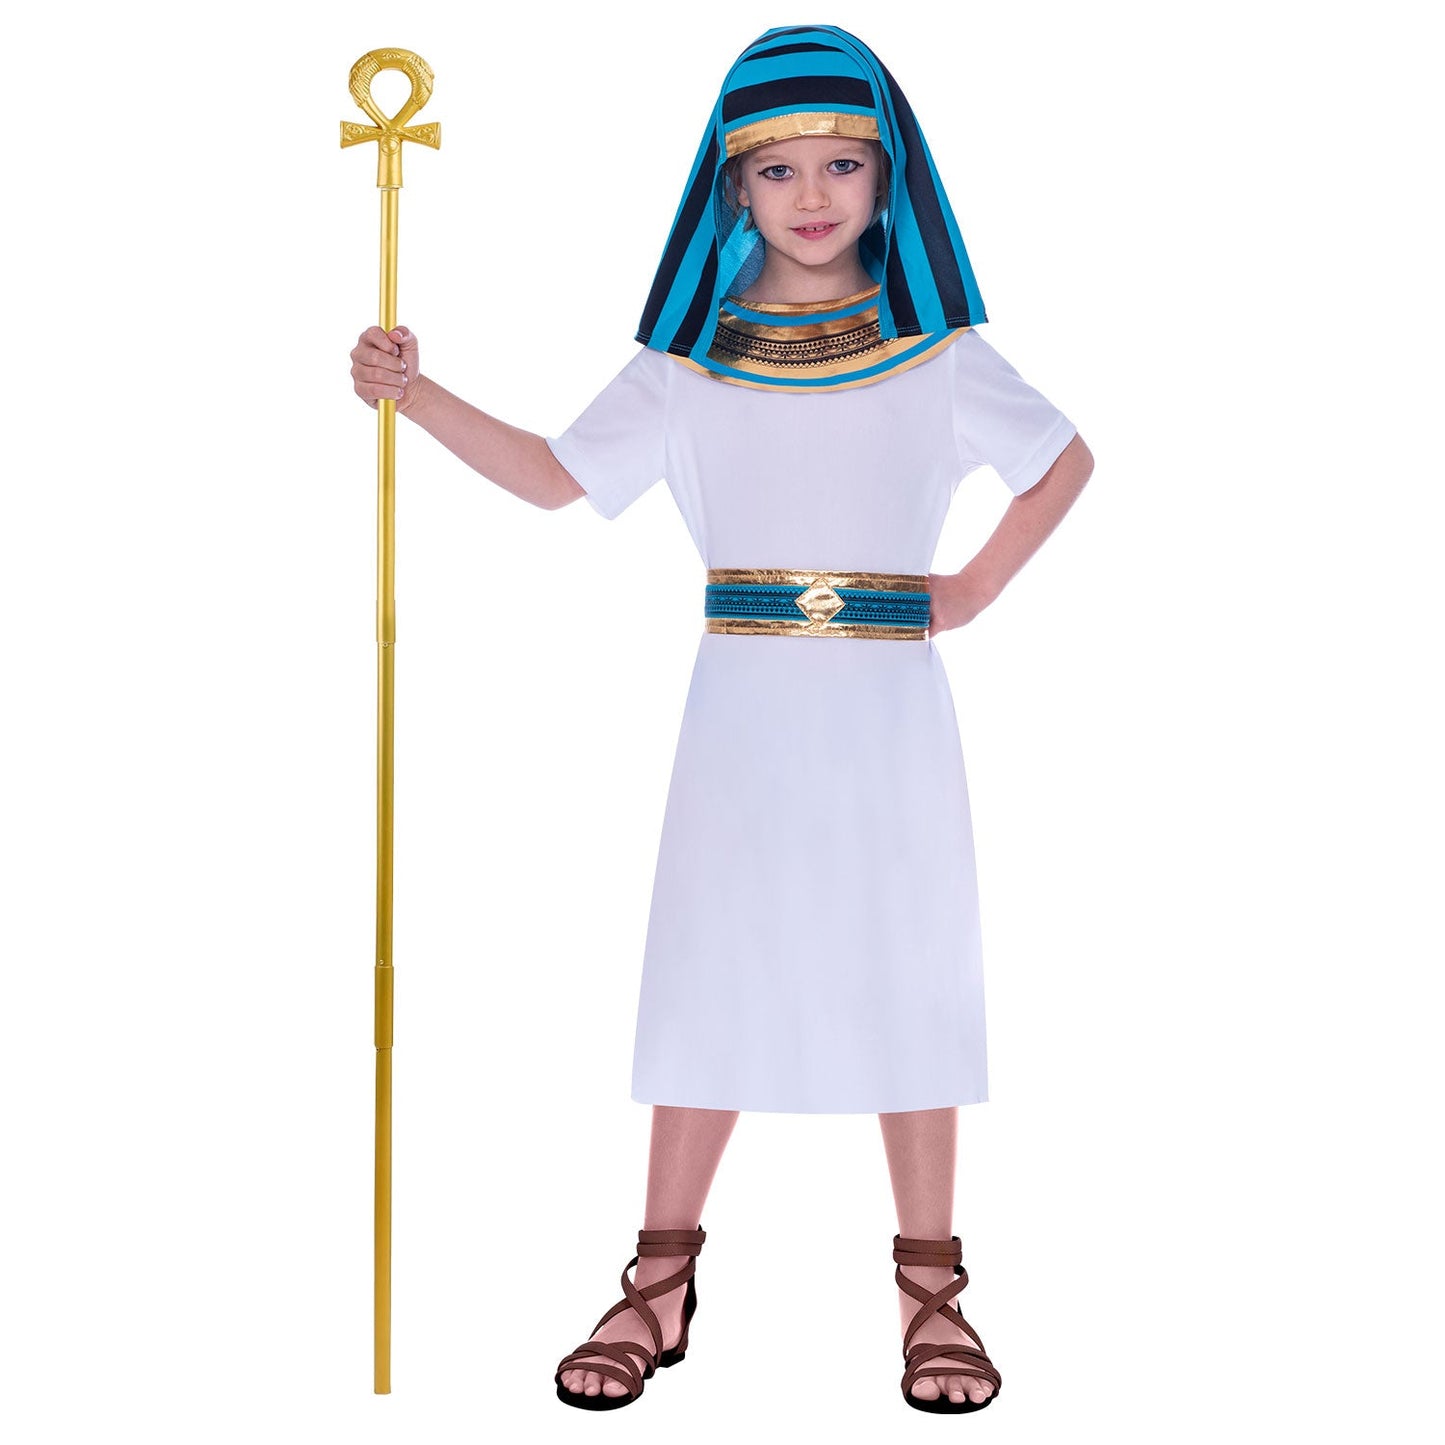 Egyptian Boy Costume includes robe, collar, headpiece and belt